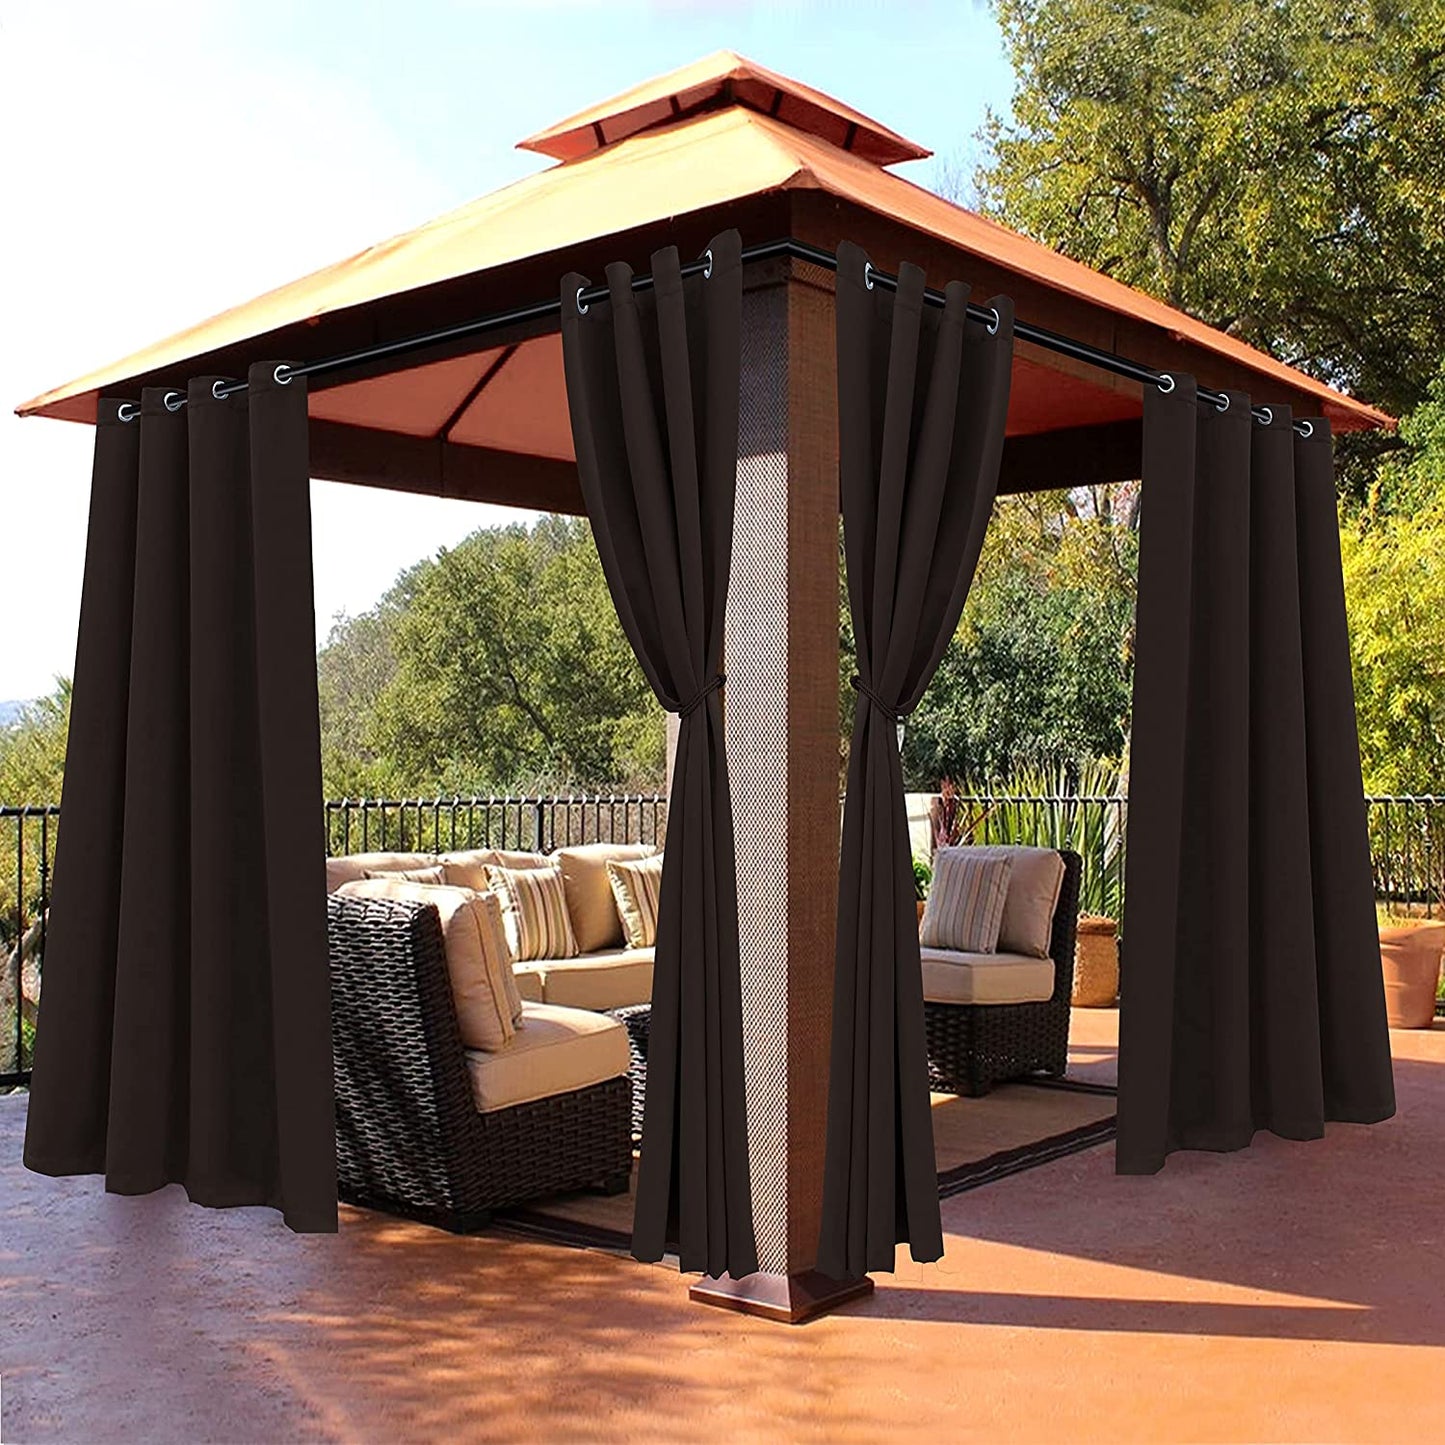 BONZER Outdoor Curtains for Patio Waterproof - Light Blocking Weather Resistant Privacy Grommet Blackout Curtains for Gazebo, Porch, Pergola, Cabana, Deck, Sunroom, 1 Panel, 52W X 84L Inch, Silver  BONZER Chocolate 52W X 108 Inch 